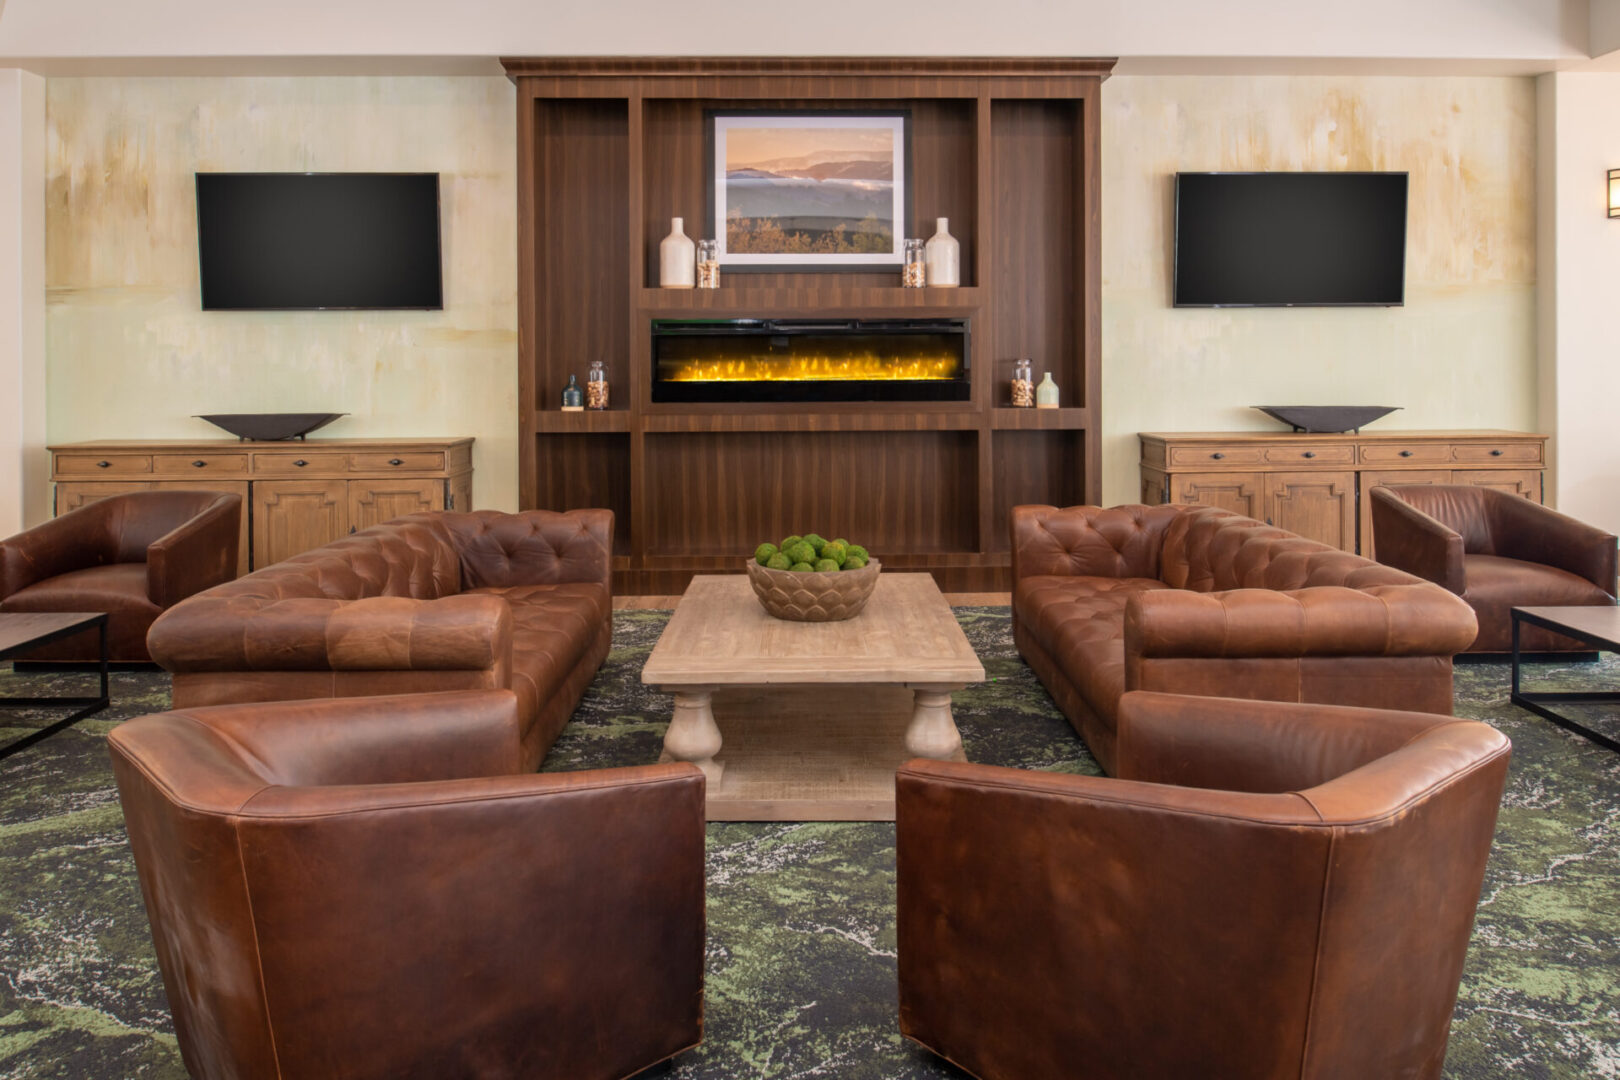 Brown Color Couches by an Indoor Fireplace